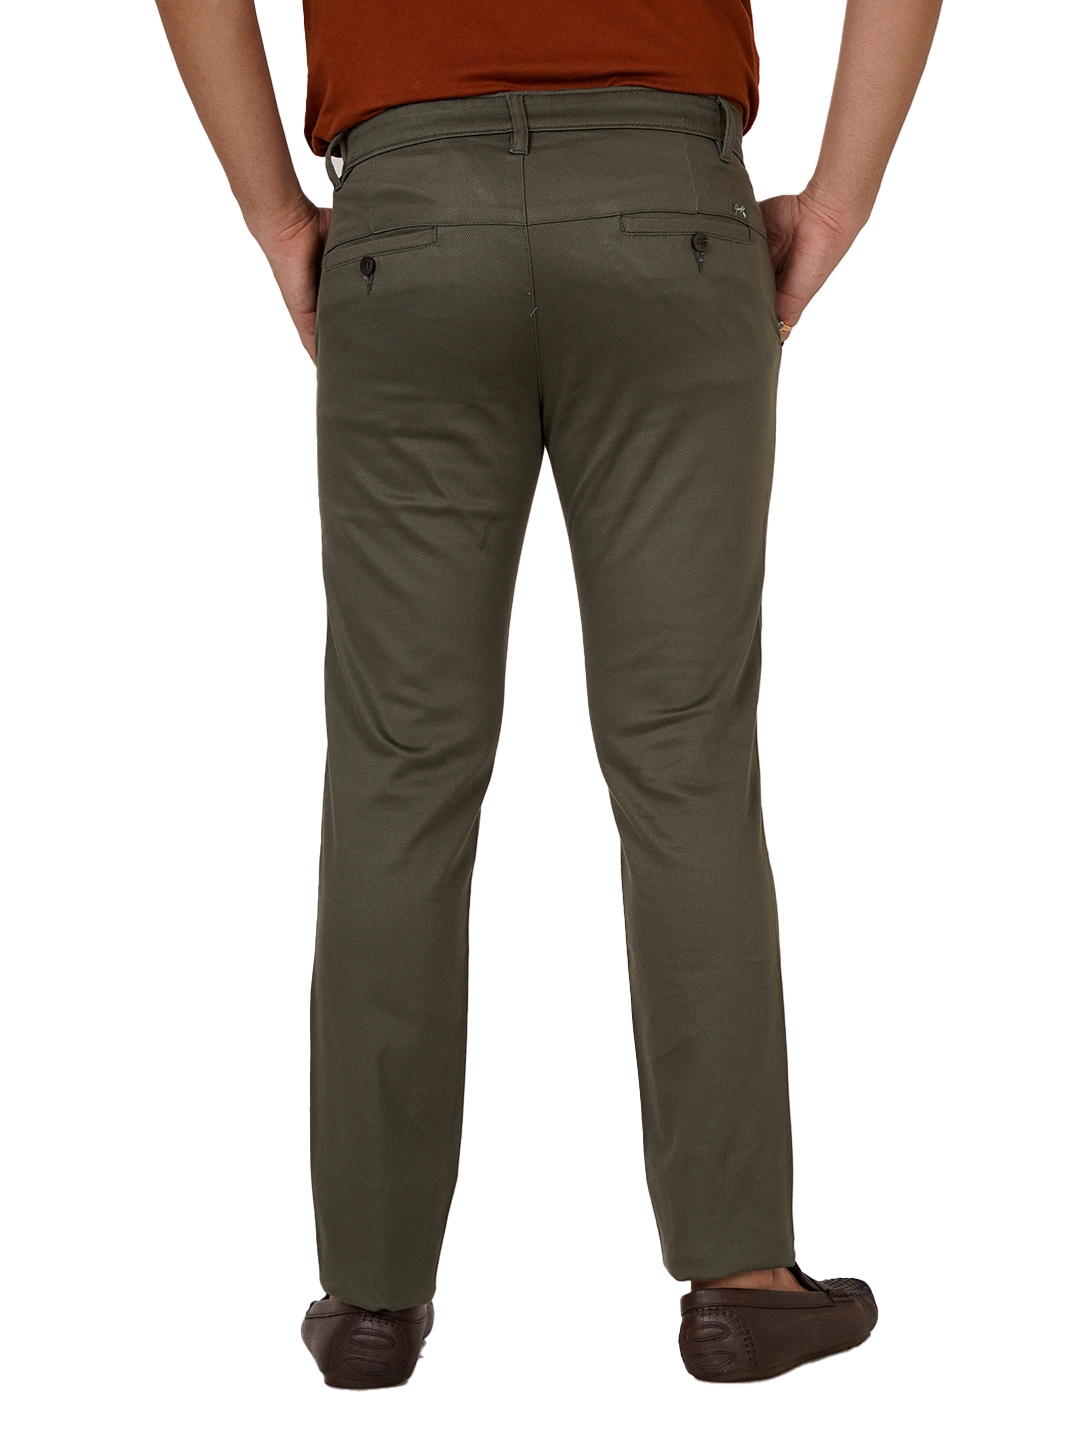 Solid Color Cotton Pant in Olive Green  BNH55